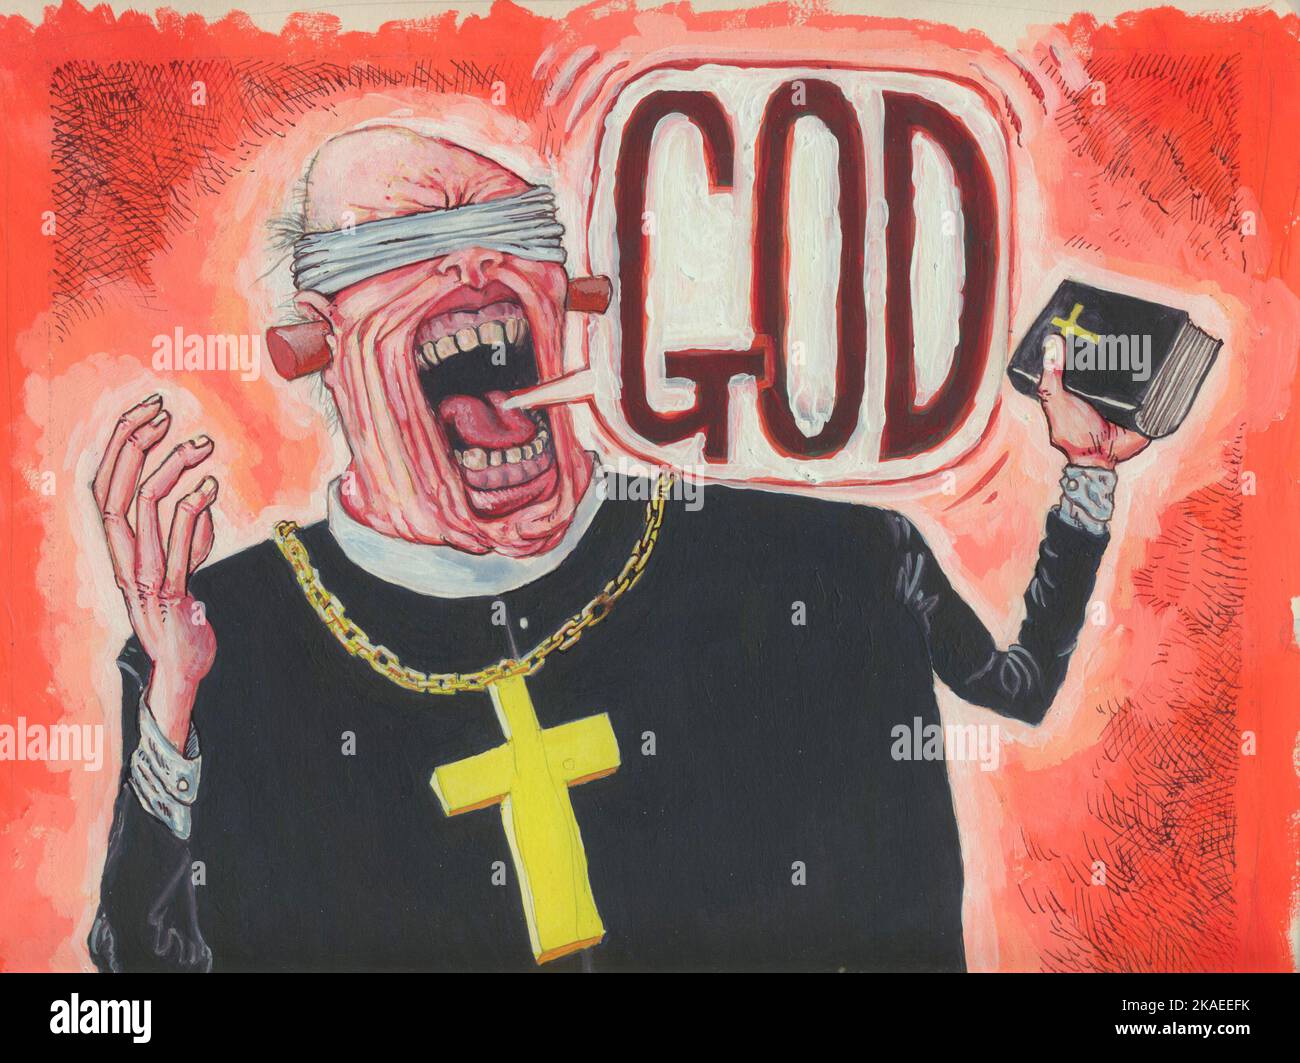 Satirical cartoon, priest blindfolded, wearing earplugs, holding a Bible, shouting 'God', illustrating blind faith, especially when used dogmatically. Stock Photo